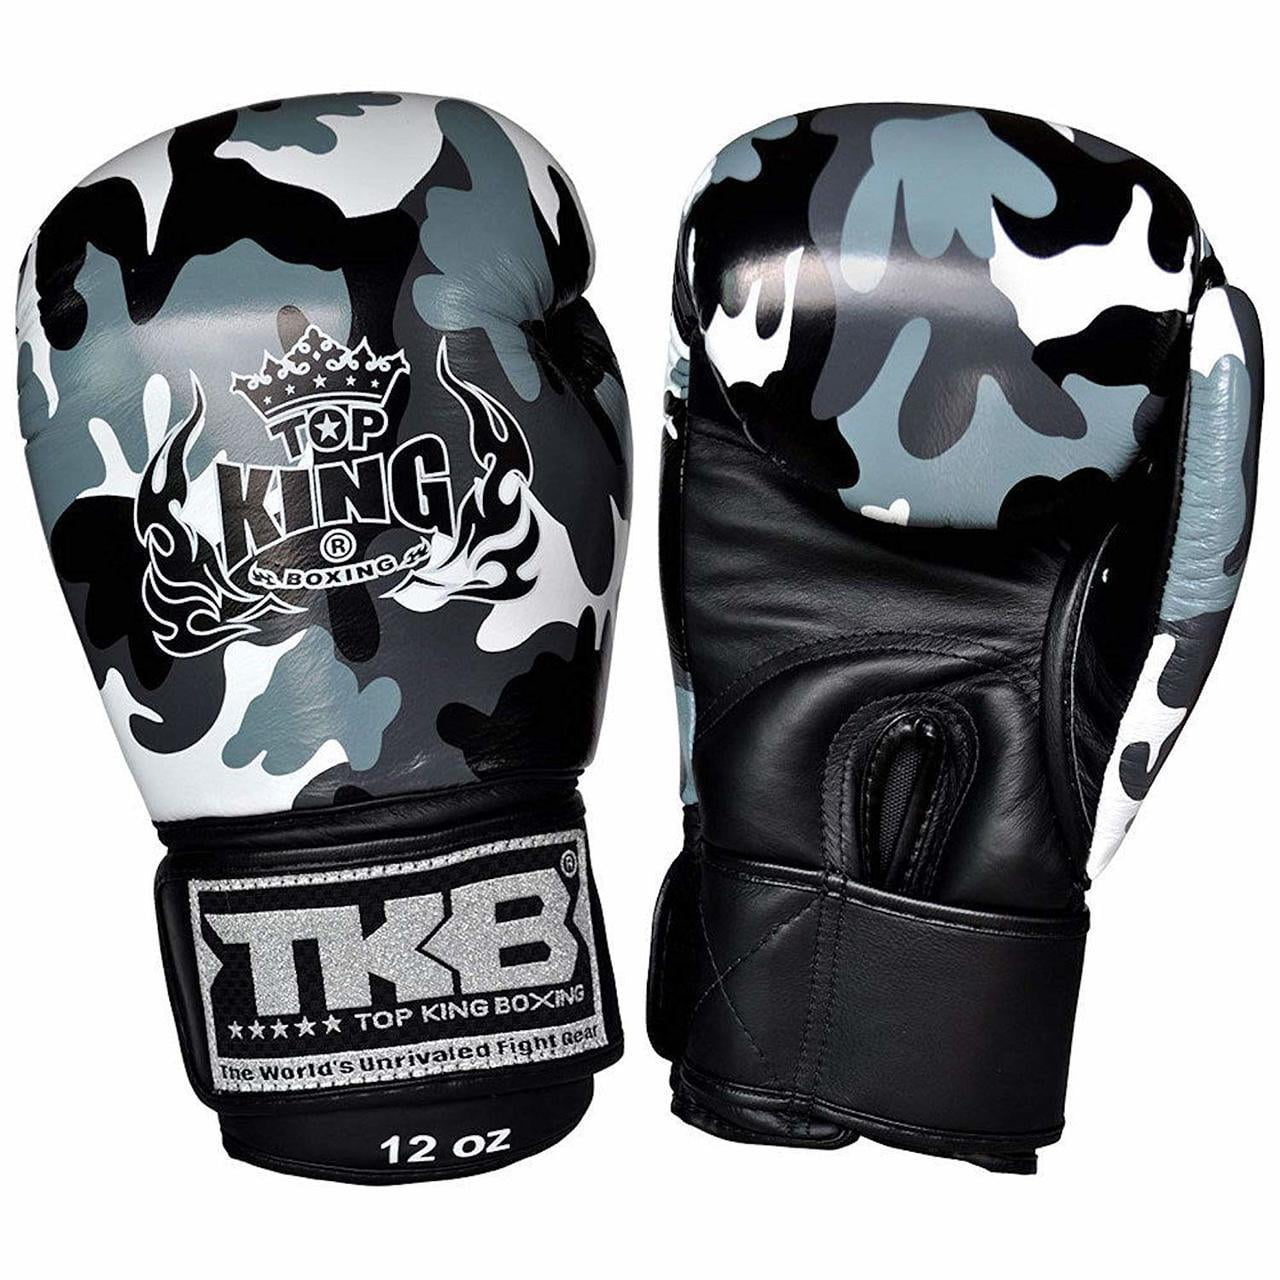 Top King Boxing Gloves Empower Creativity Camouflage 